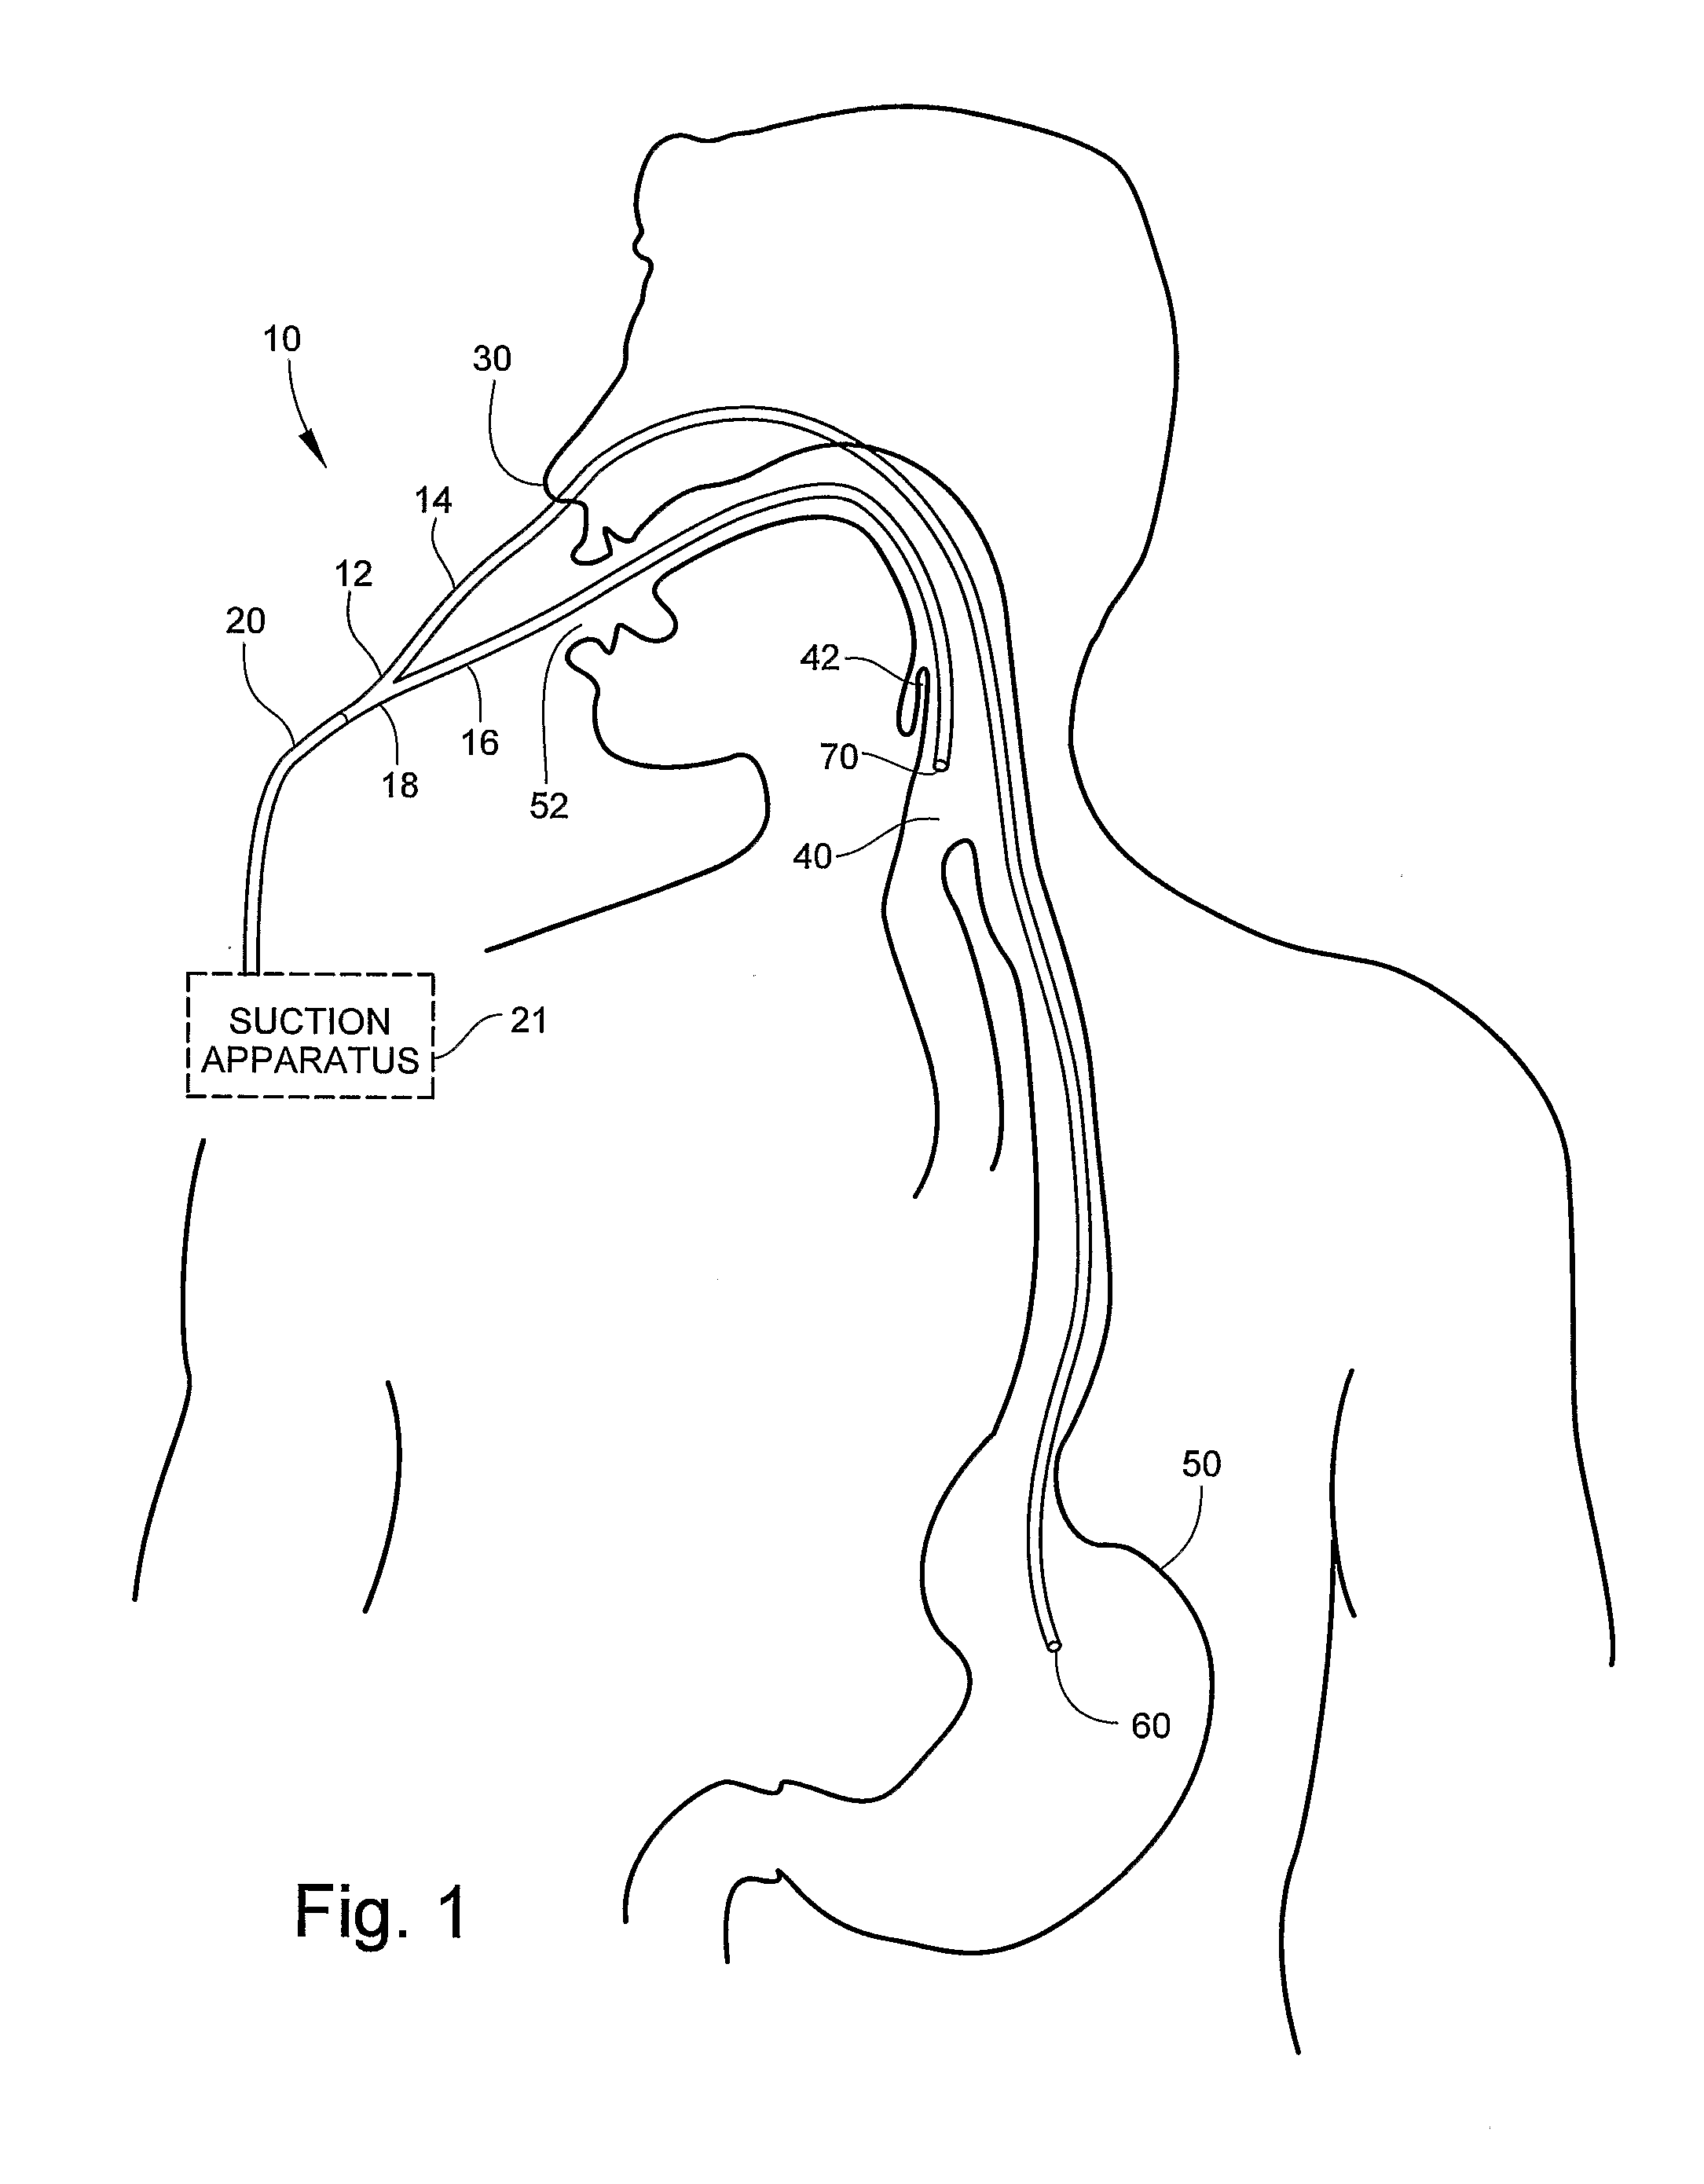 Medical Apparatus with Hypropharyngeal Suctioning Capability